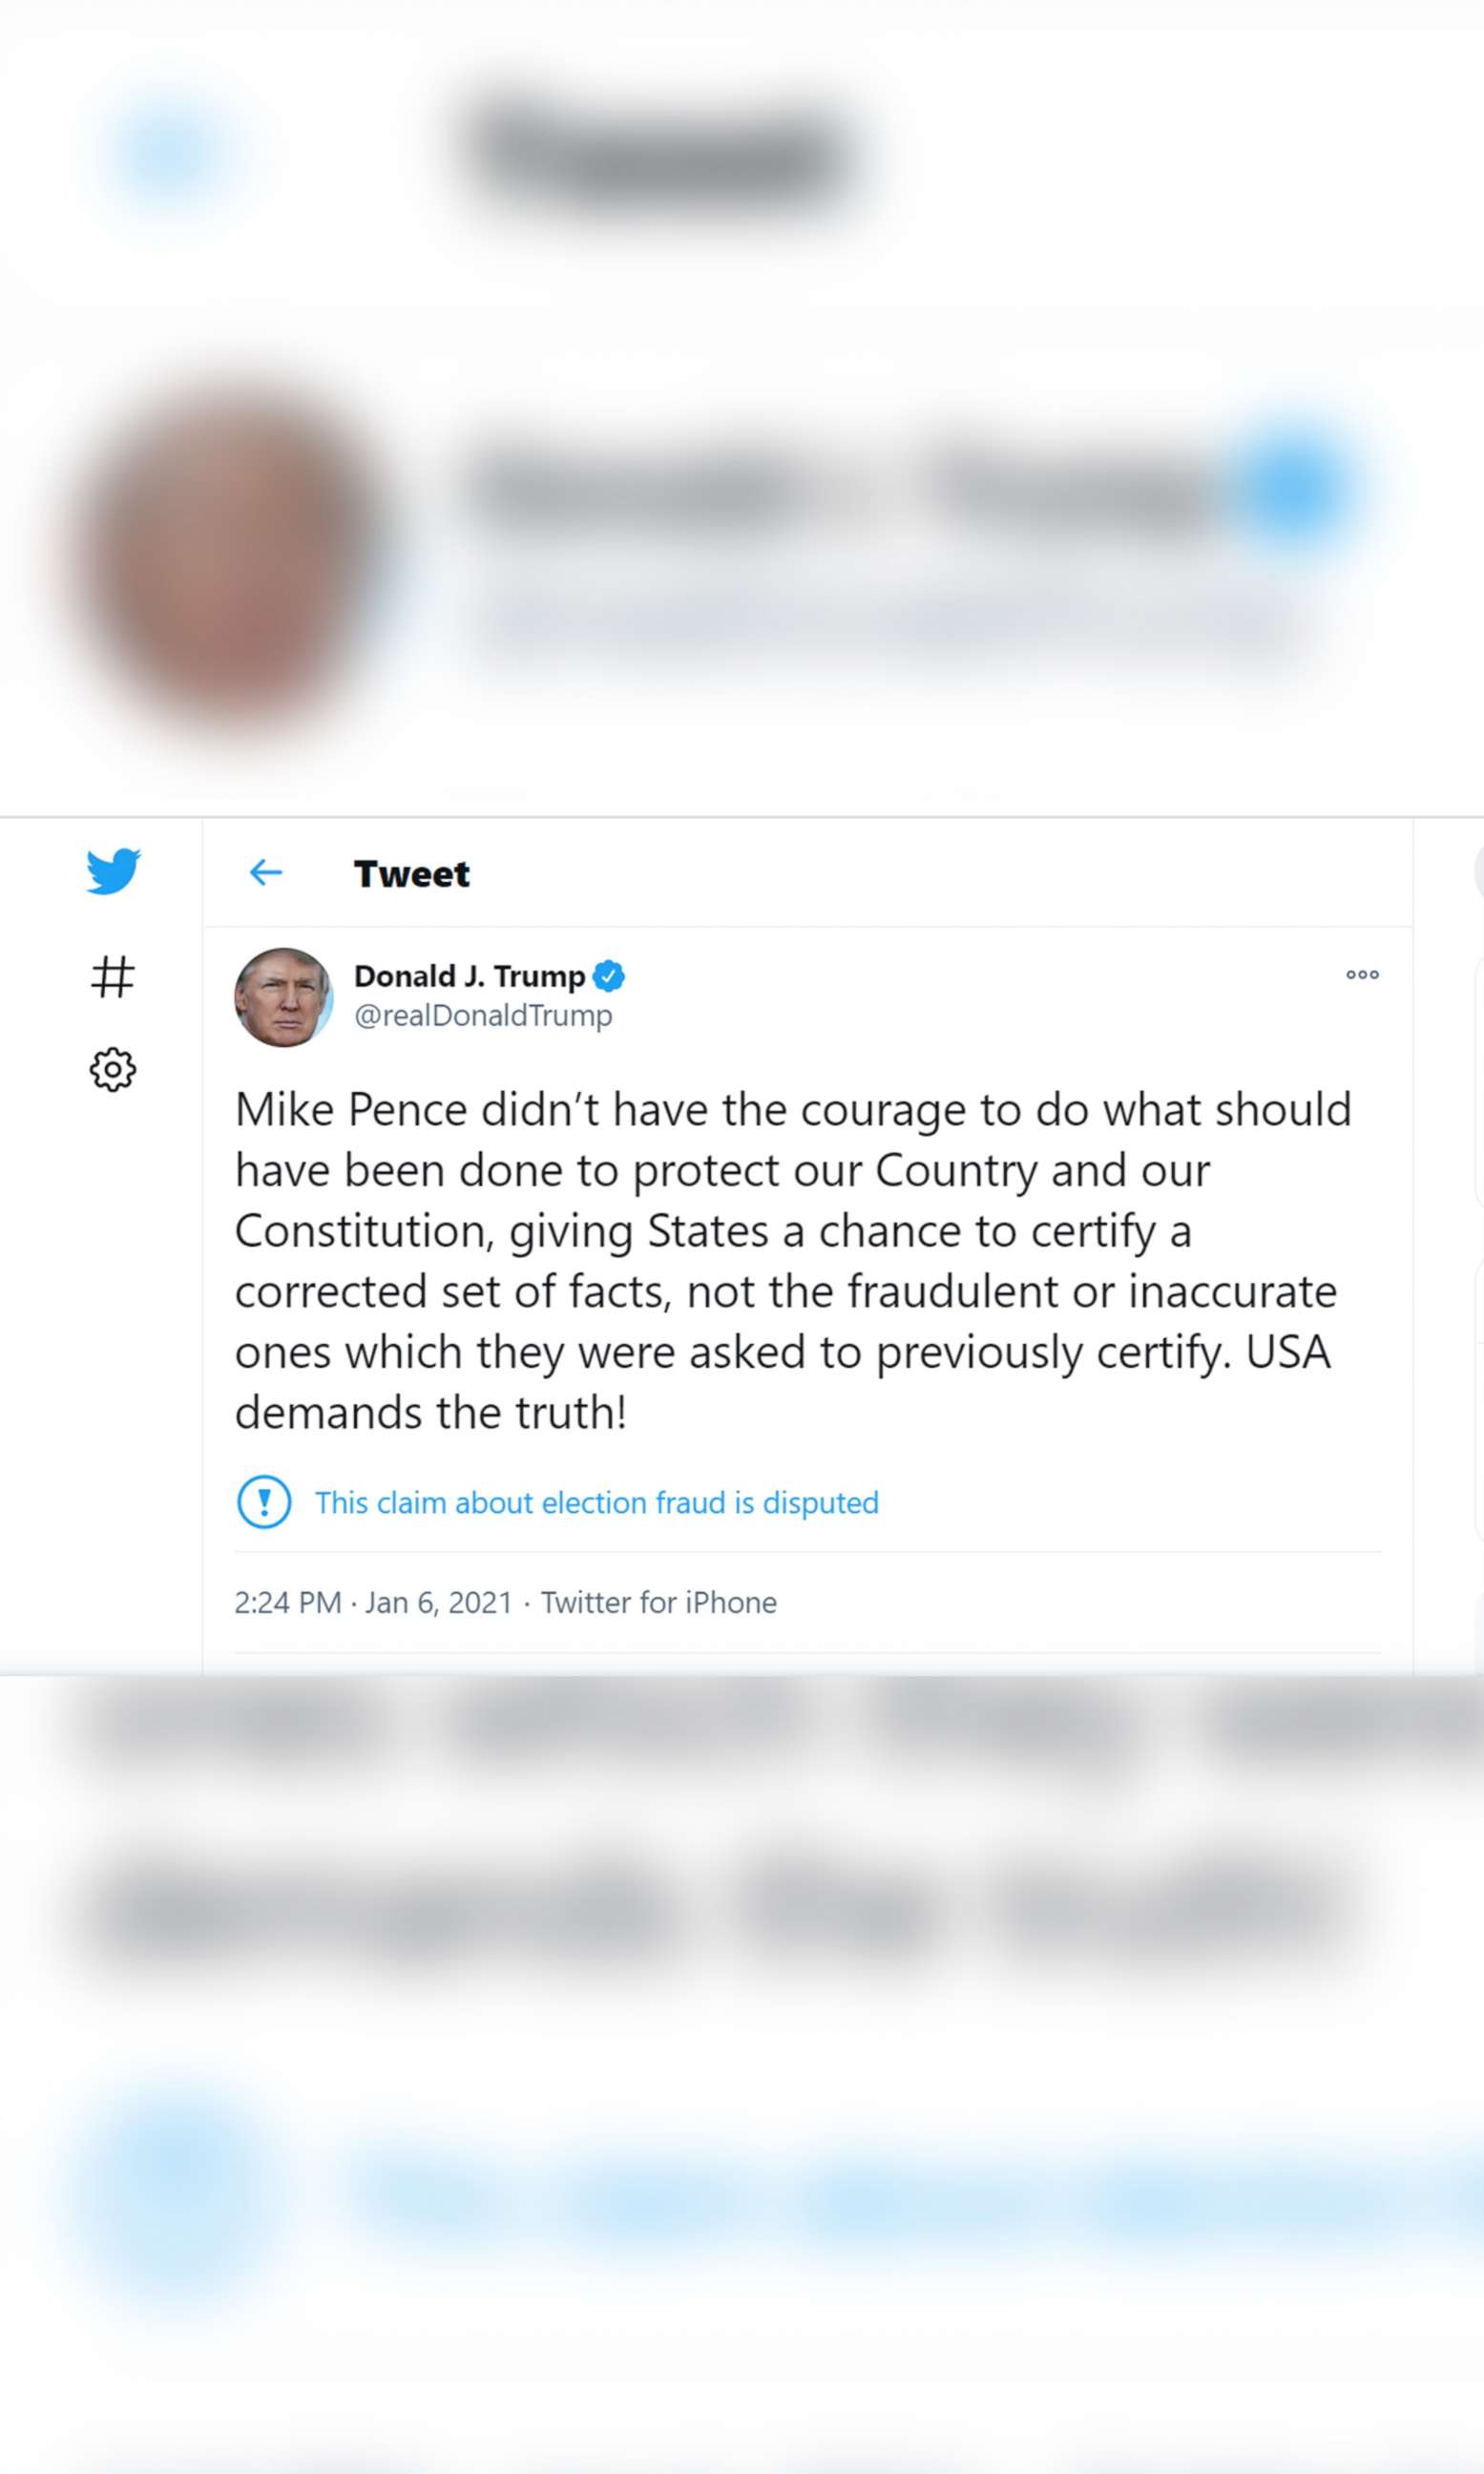 PHOTO: Tweet from the Twitter account of President Donald Trump posted on the afternoon of Jan. 6, 2021 as members of Congress convened to debate the certification of the election and crowds of protesters gathered in Washington.